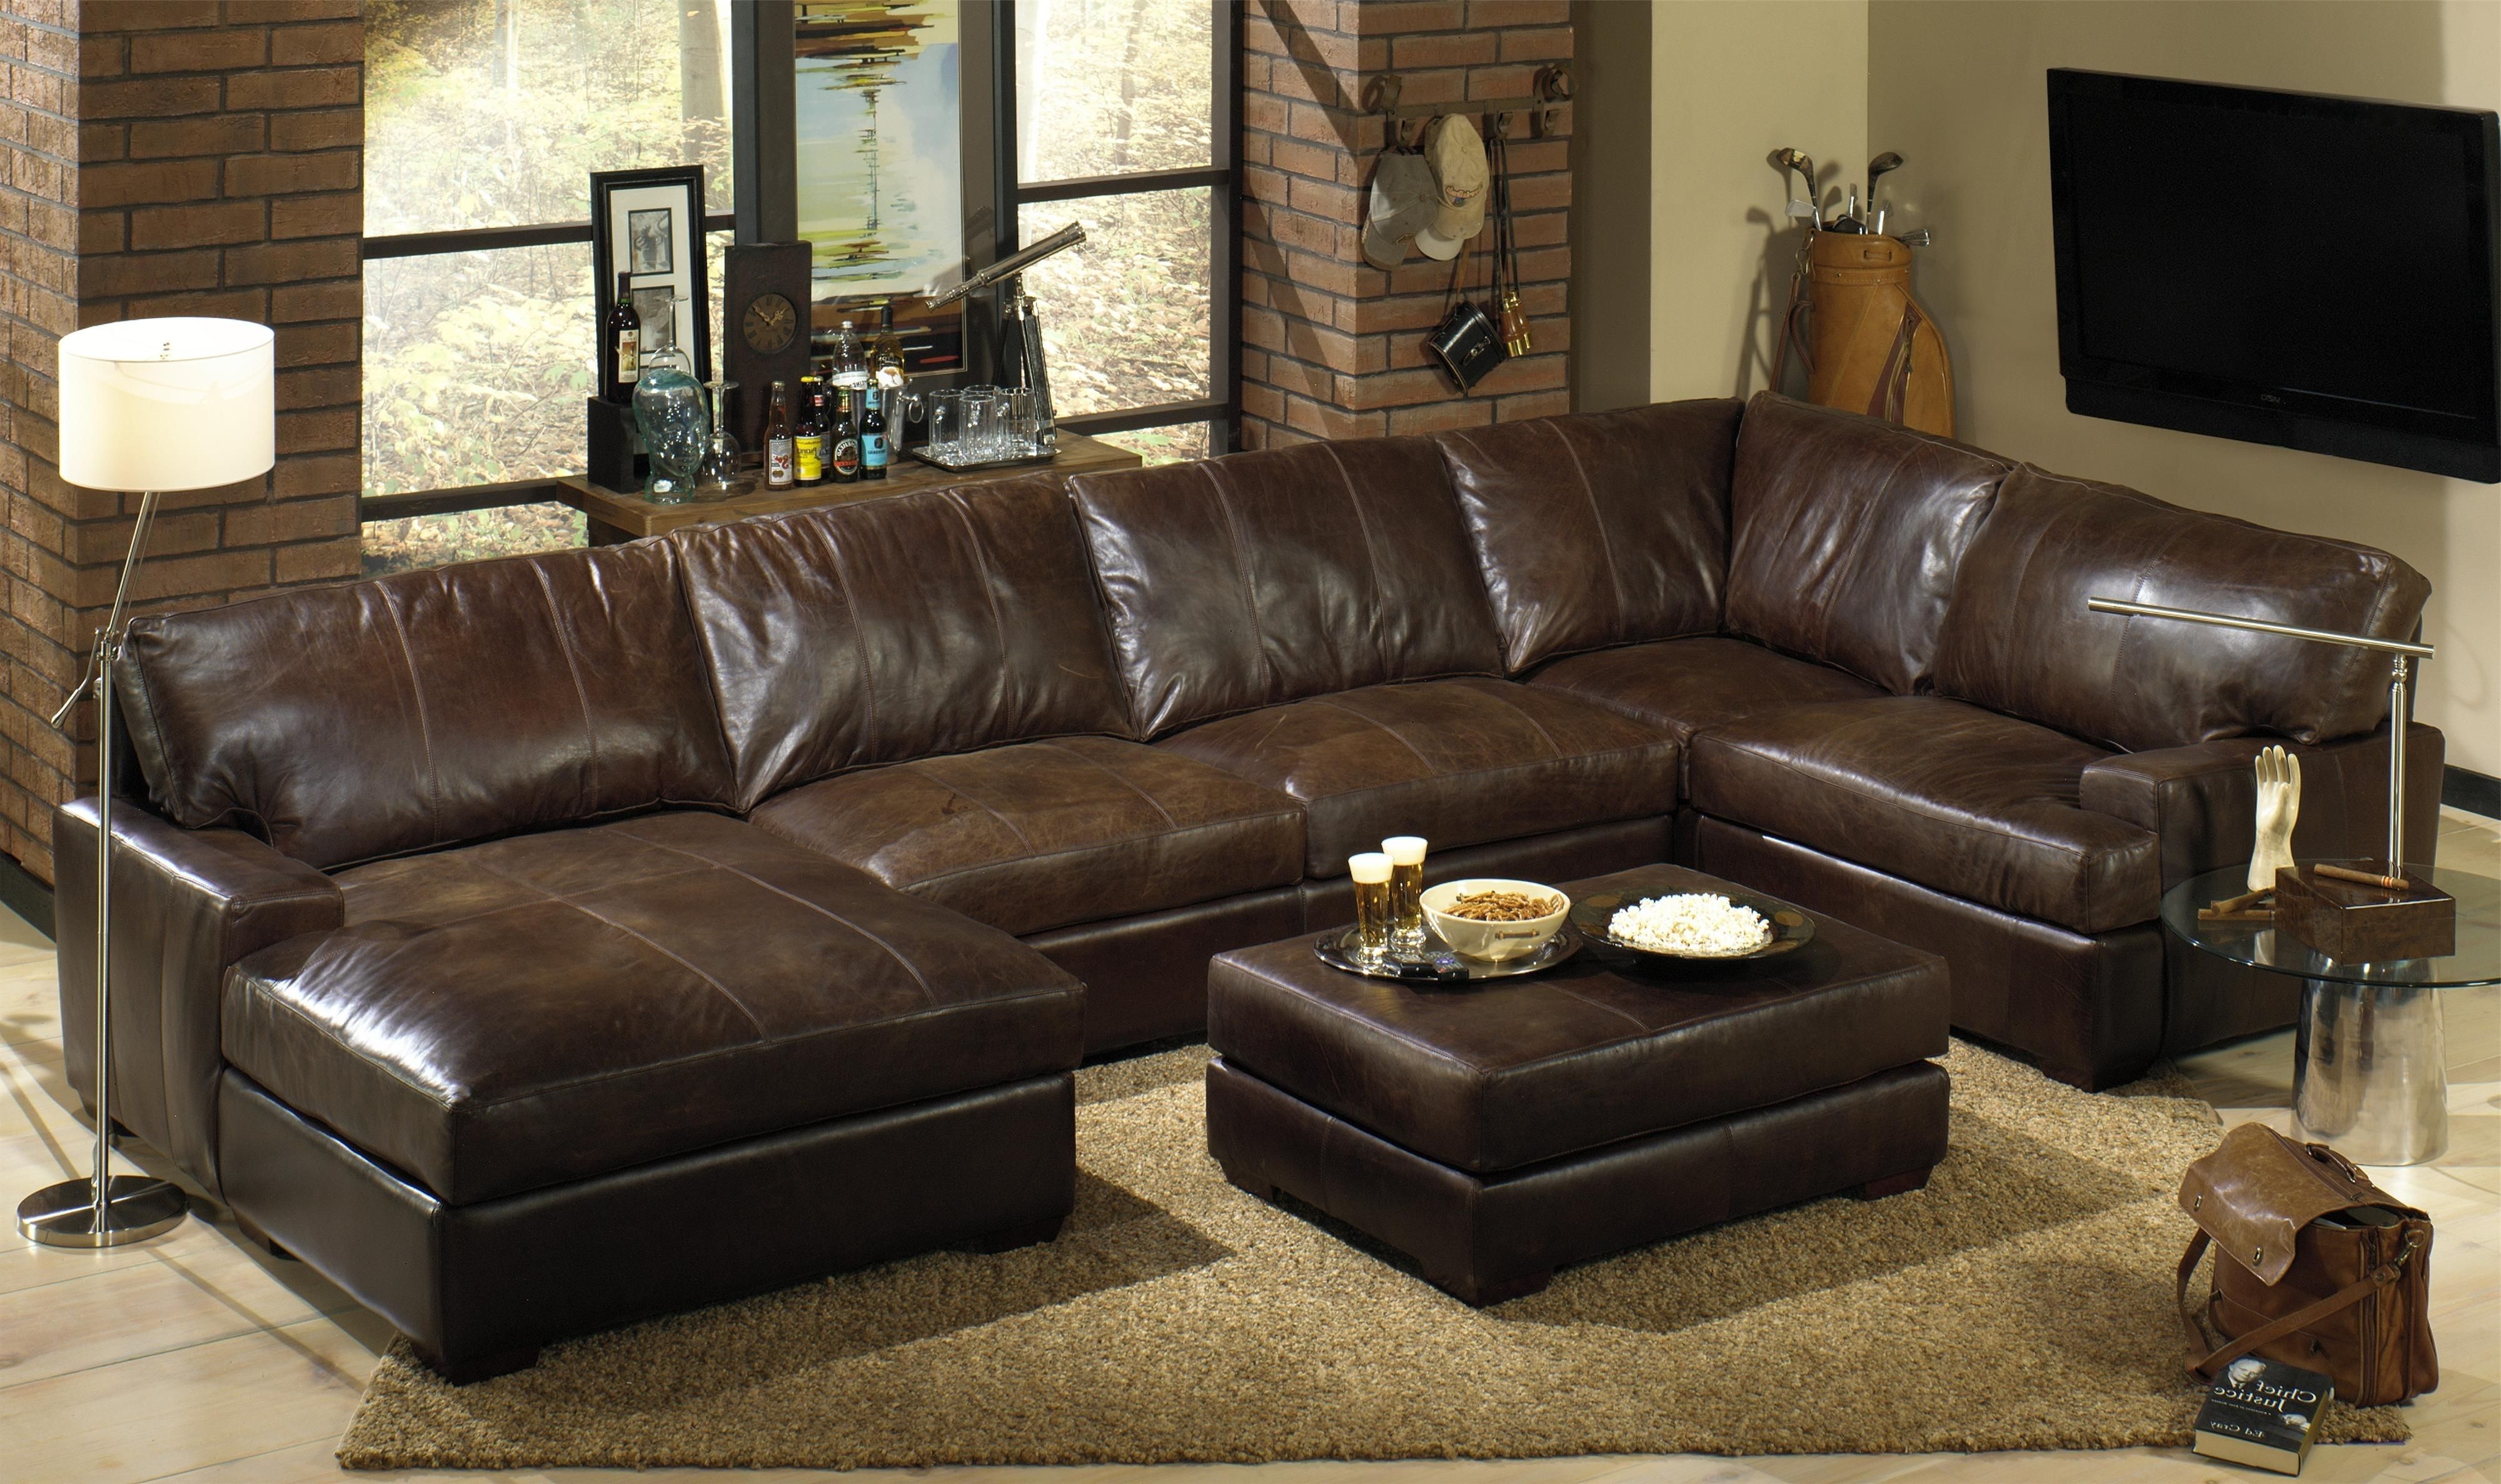 Most Current Stylish Sectional Sofas Tulsa – Buildsimplehome Within Tulsa Sectional Sofas (View 10 of 15)